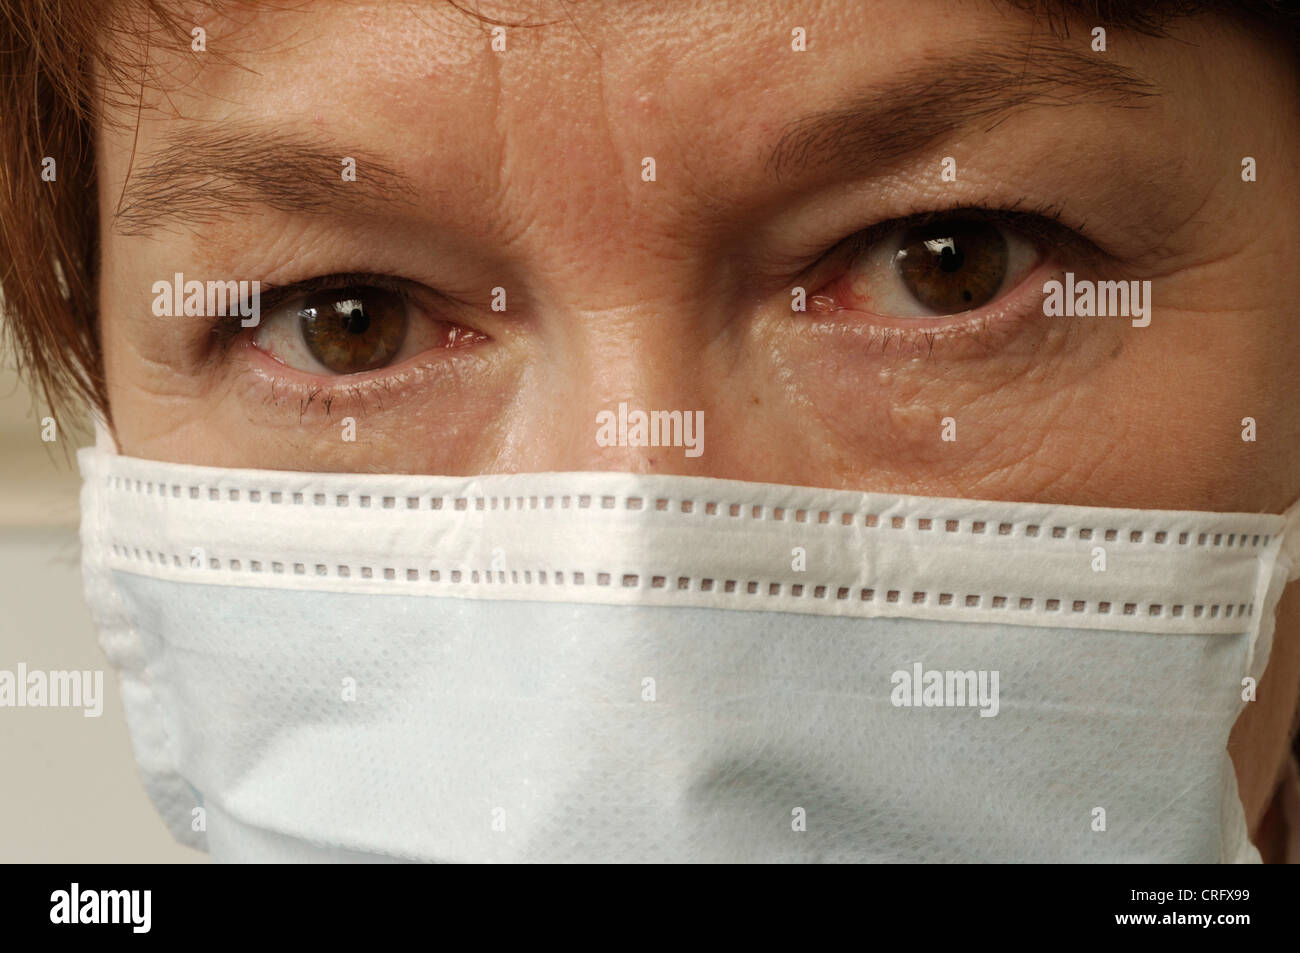 Facial close up of a mature woman with staring eyes wearing a surgical mask. Stock Photo